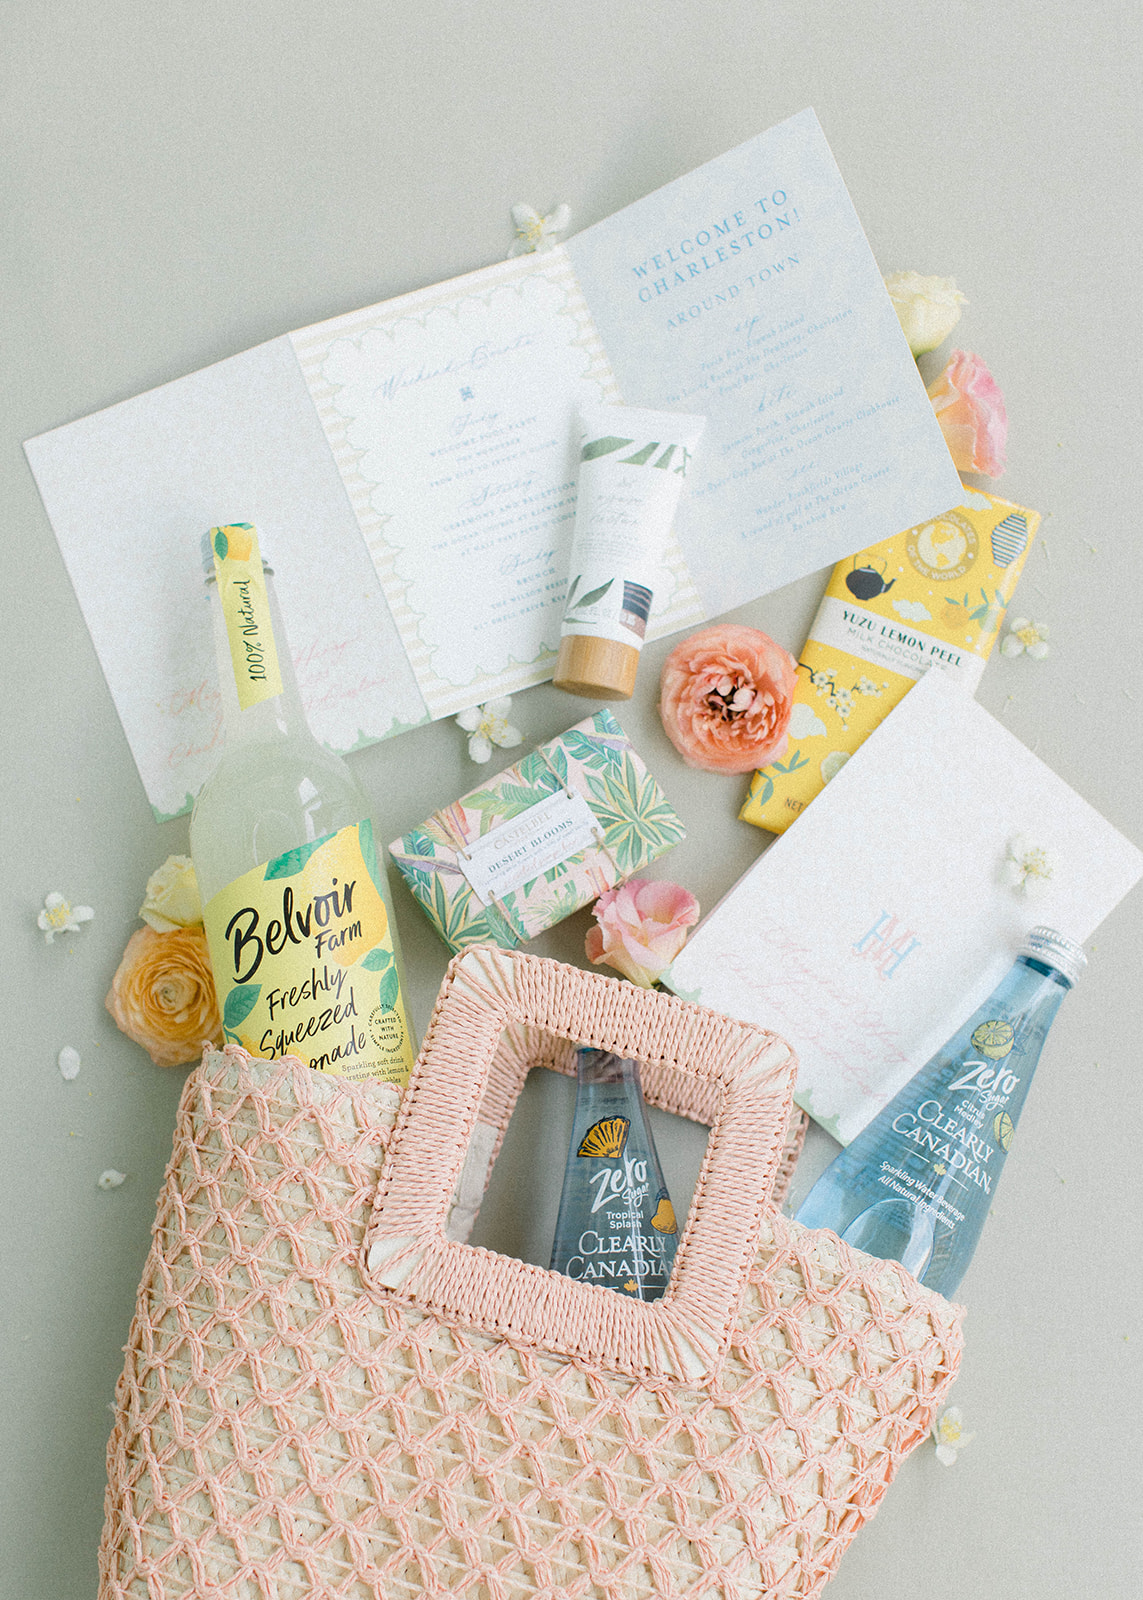 Welcome bag and gifts for destination wedding day in Charleston